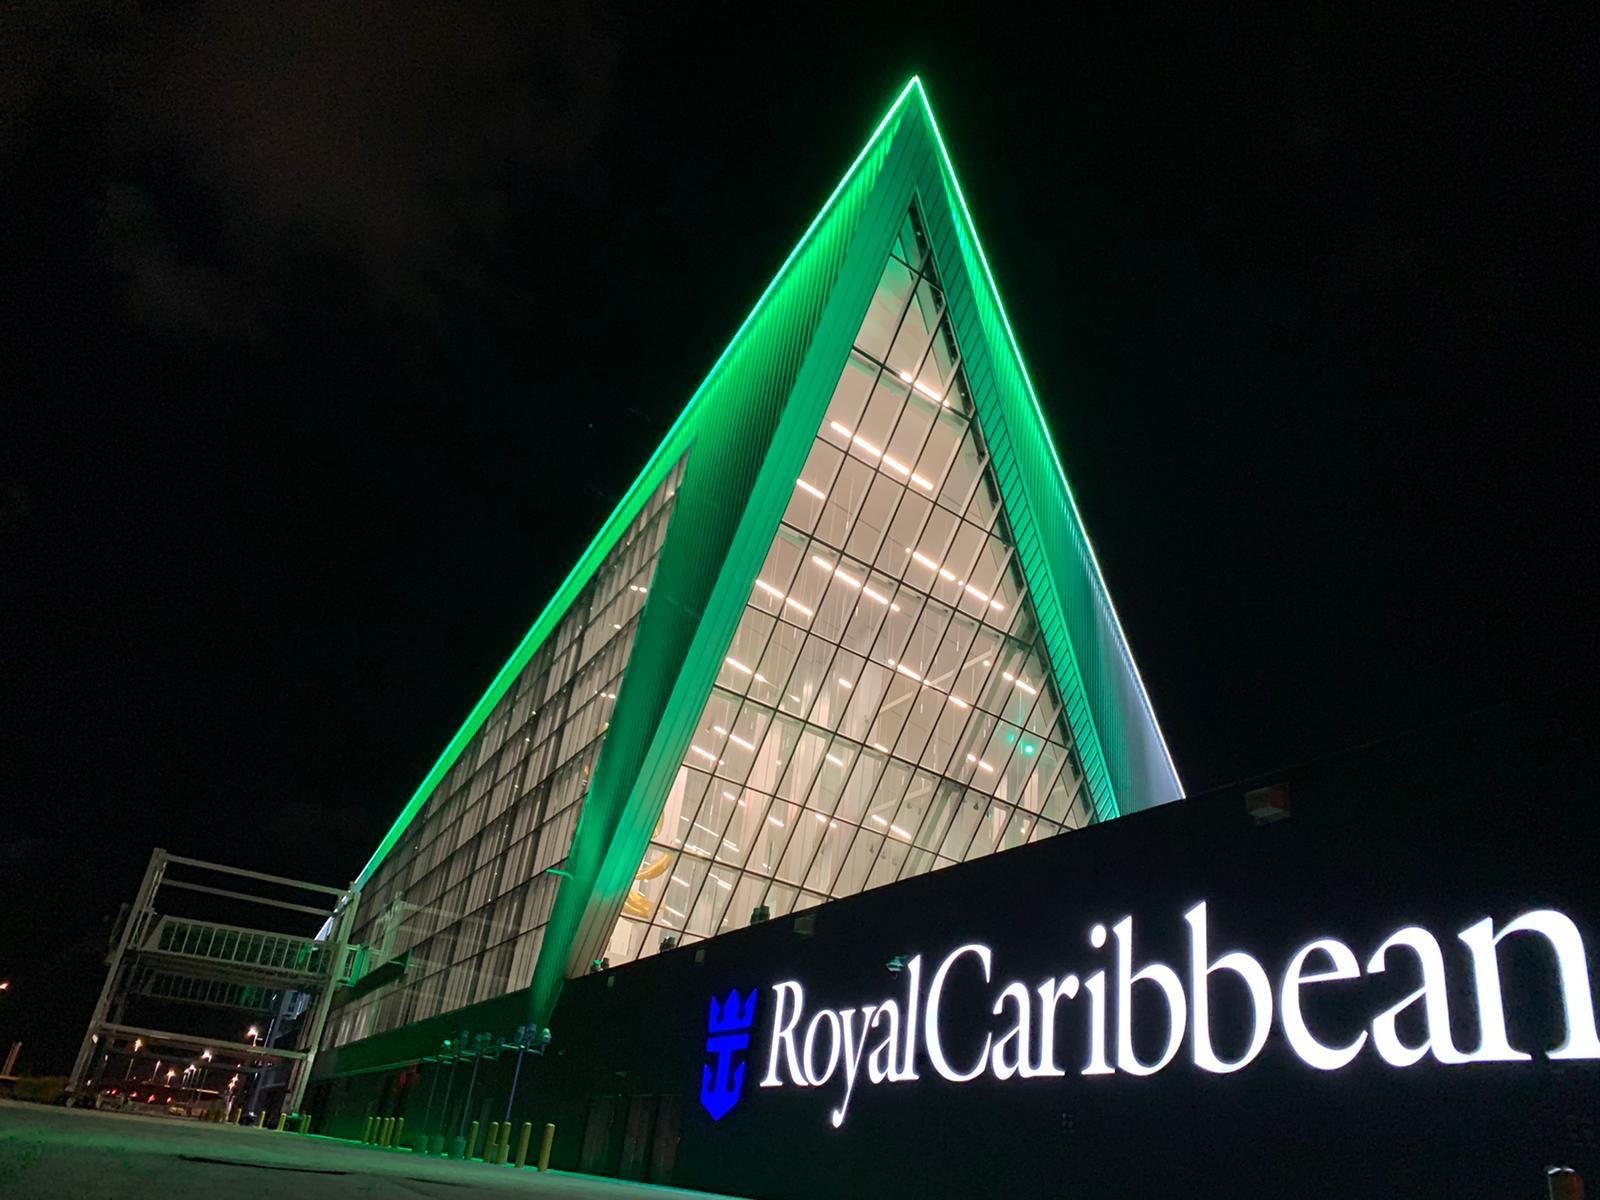 New lighting added to Terminal A in PortMiami | Royal Caribbean Blog